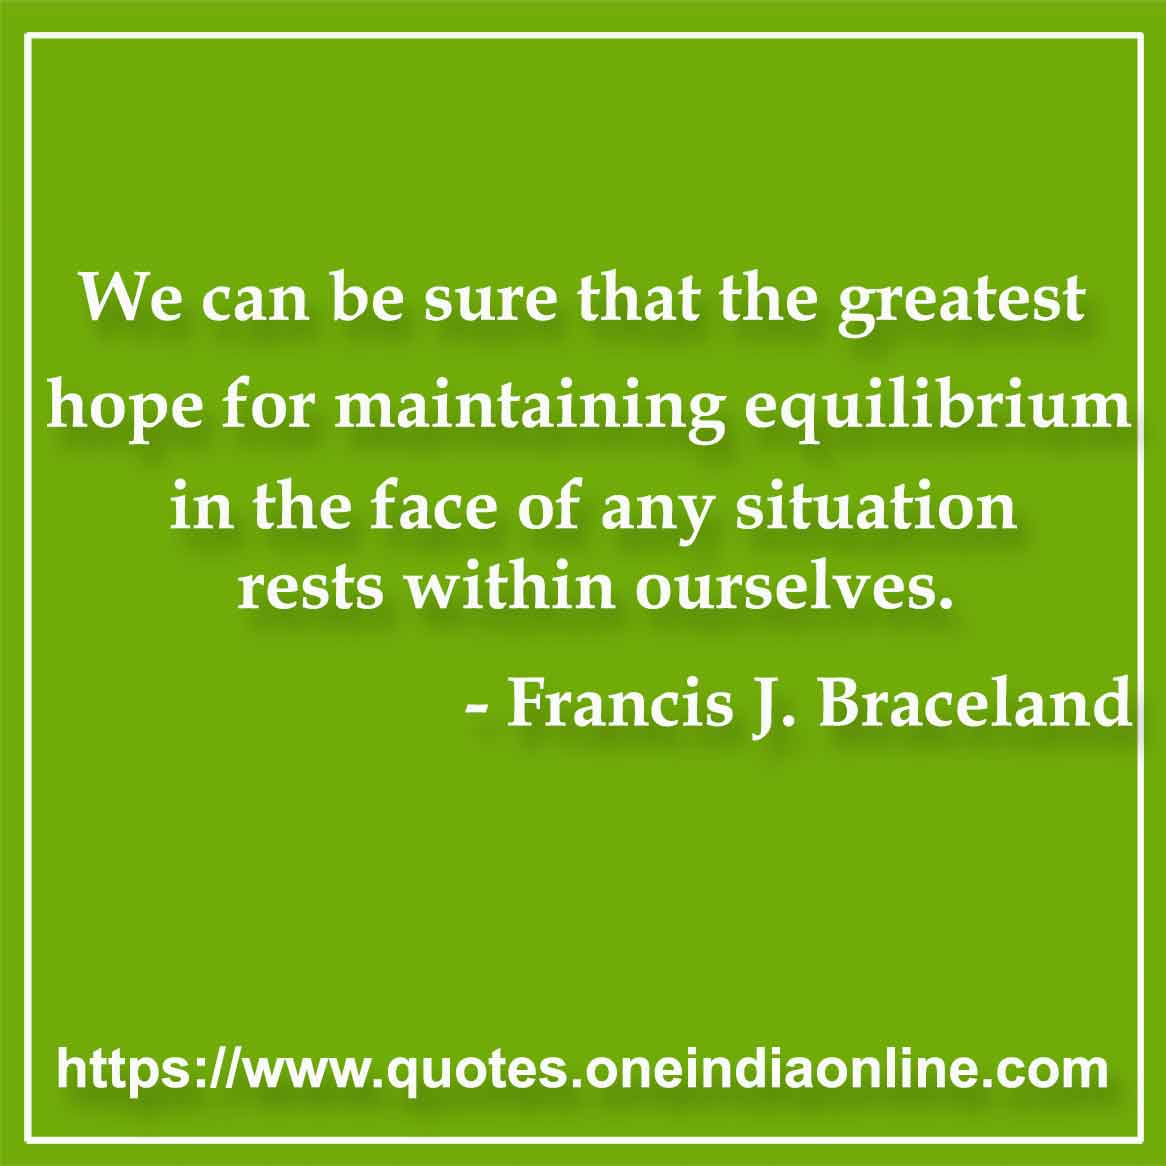 We can be sure that the greatest hope for maintaining equilibrium in the face of any situation rests within ourselves.

- Balance Quote by Francis J. Braceland